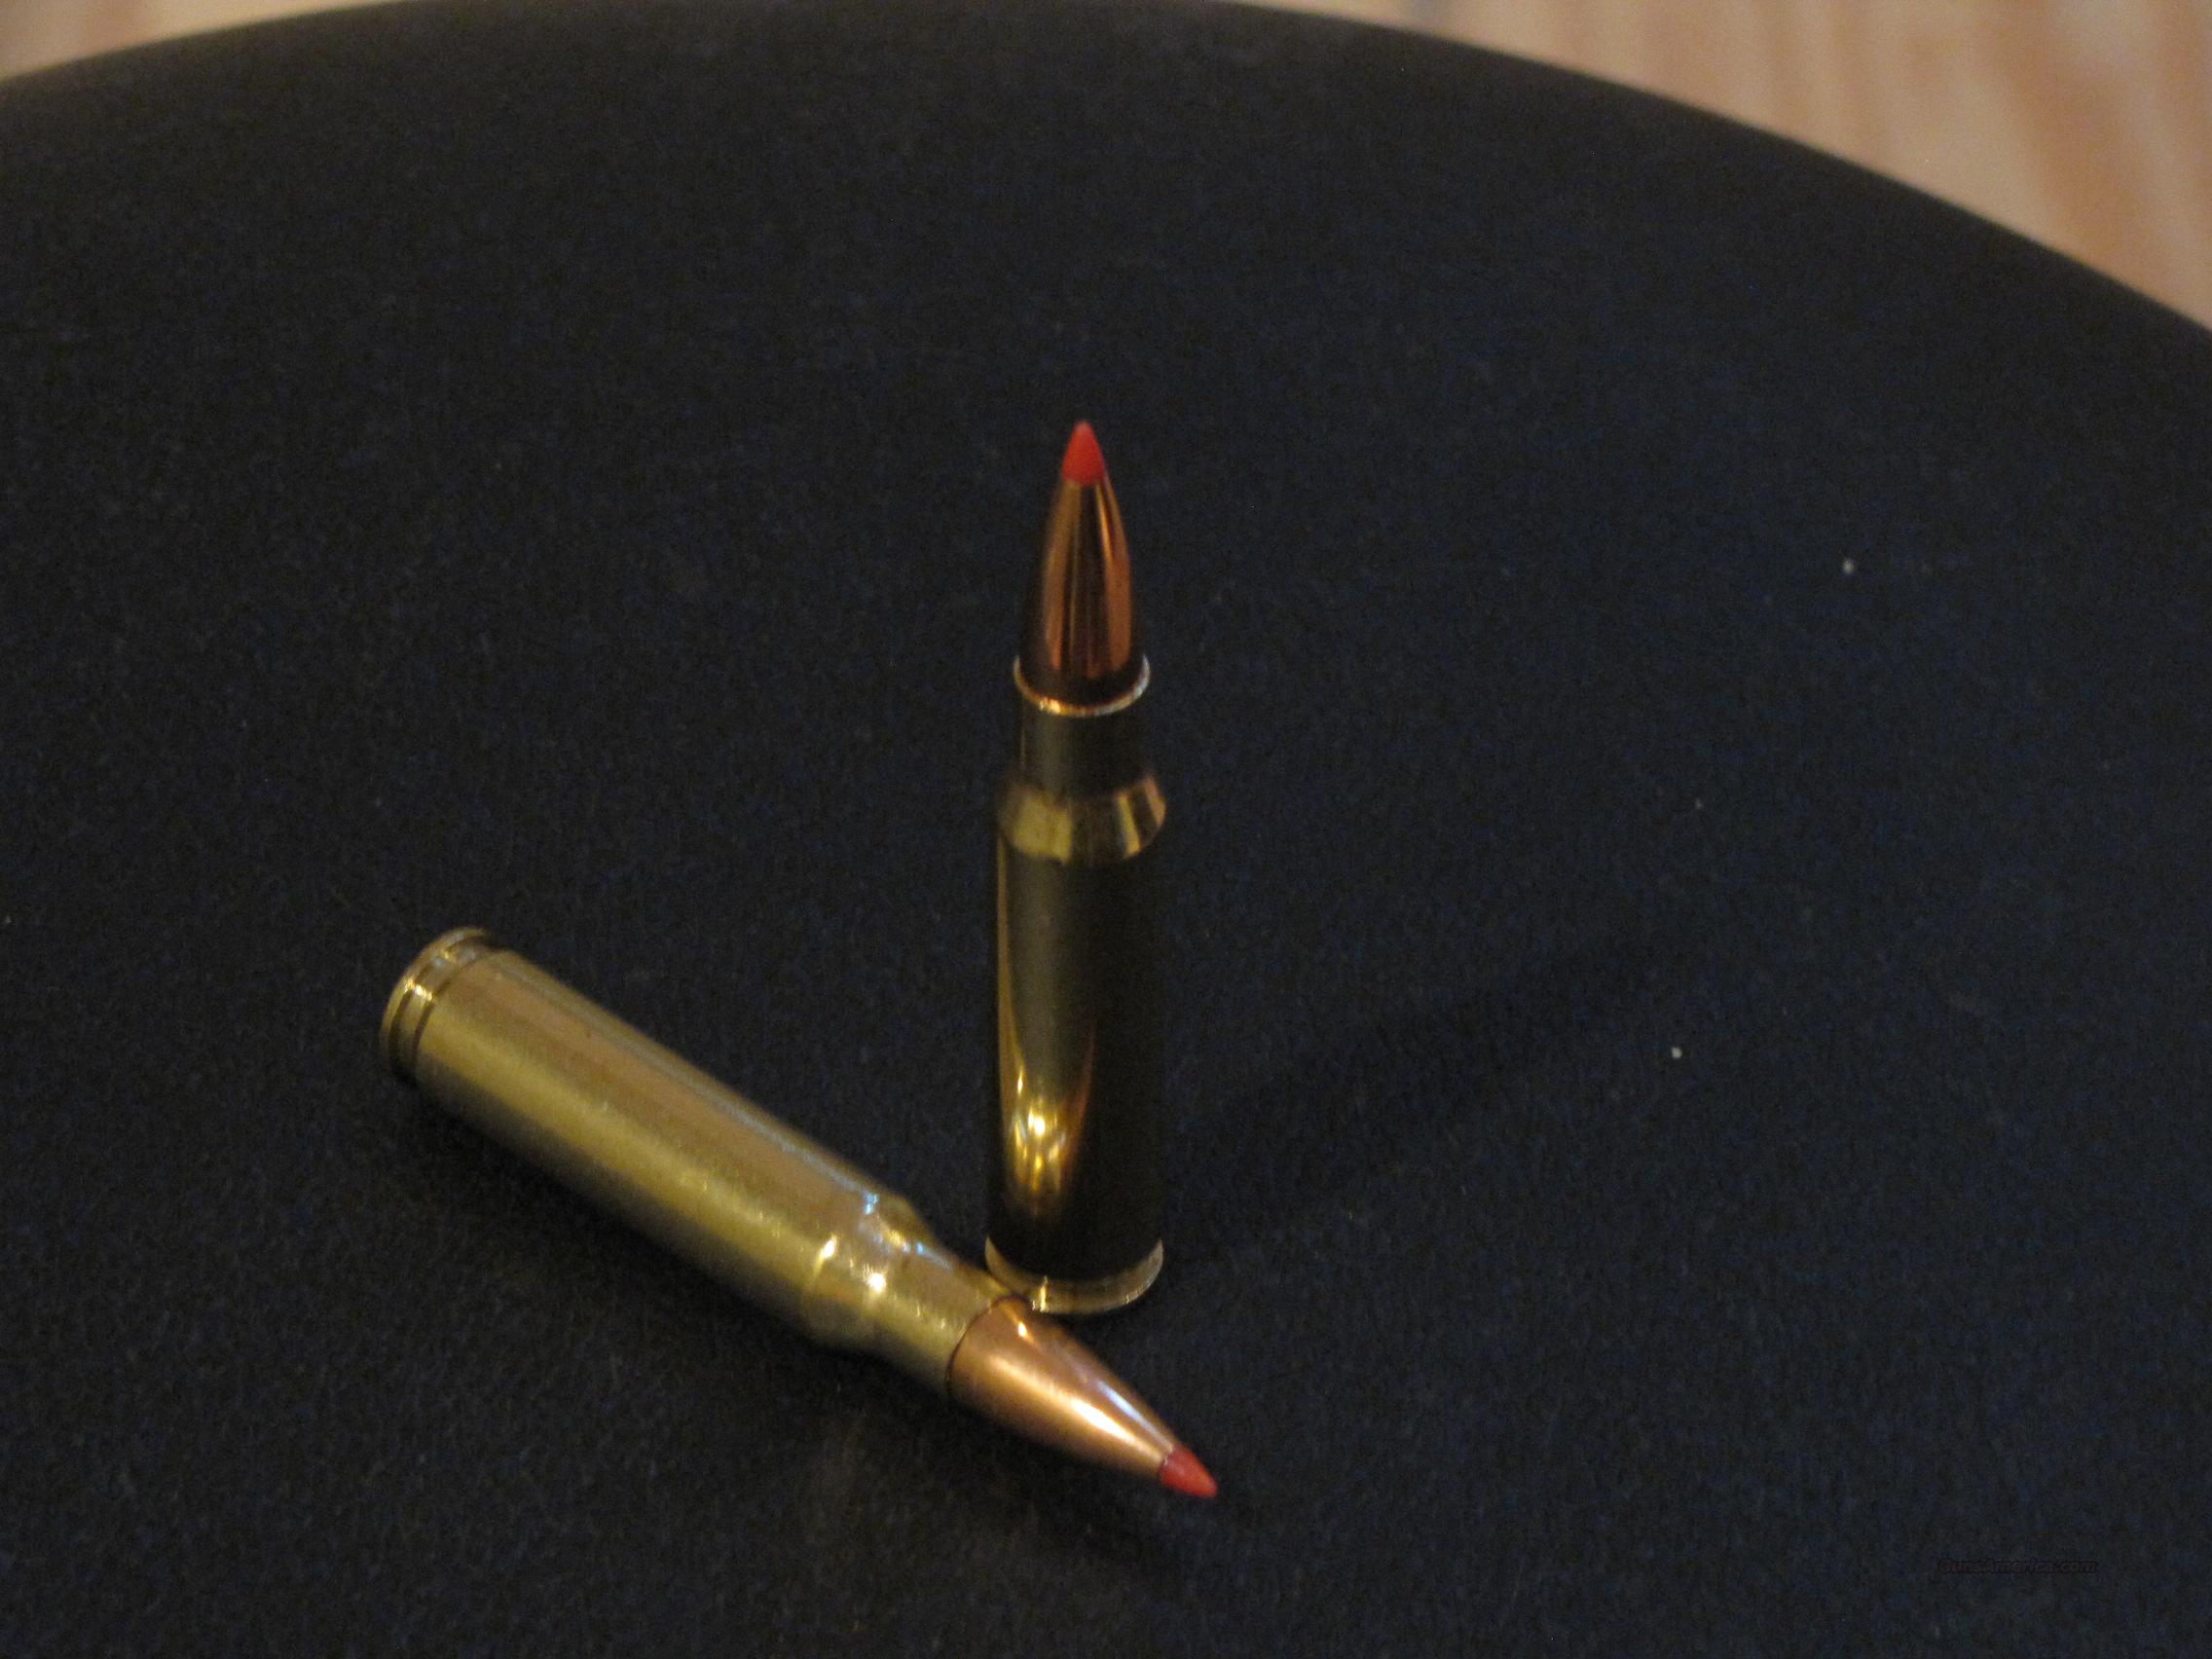 308 controlled fracturing 176gr subsonic bullet